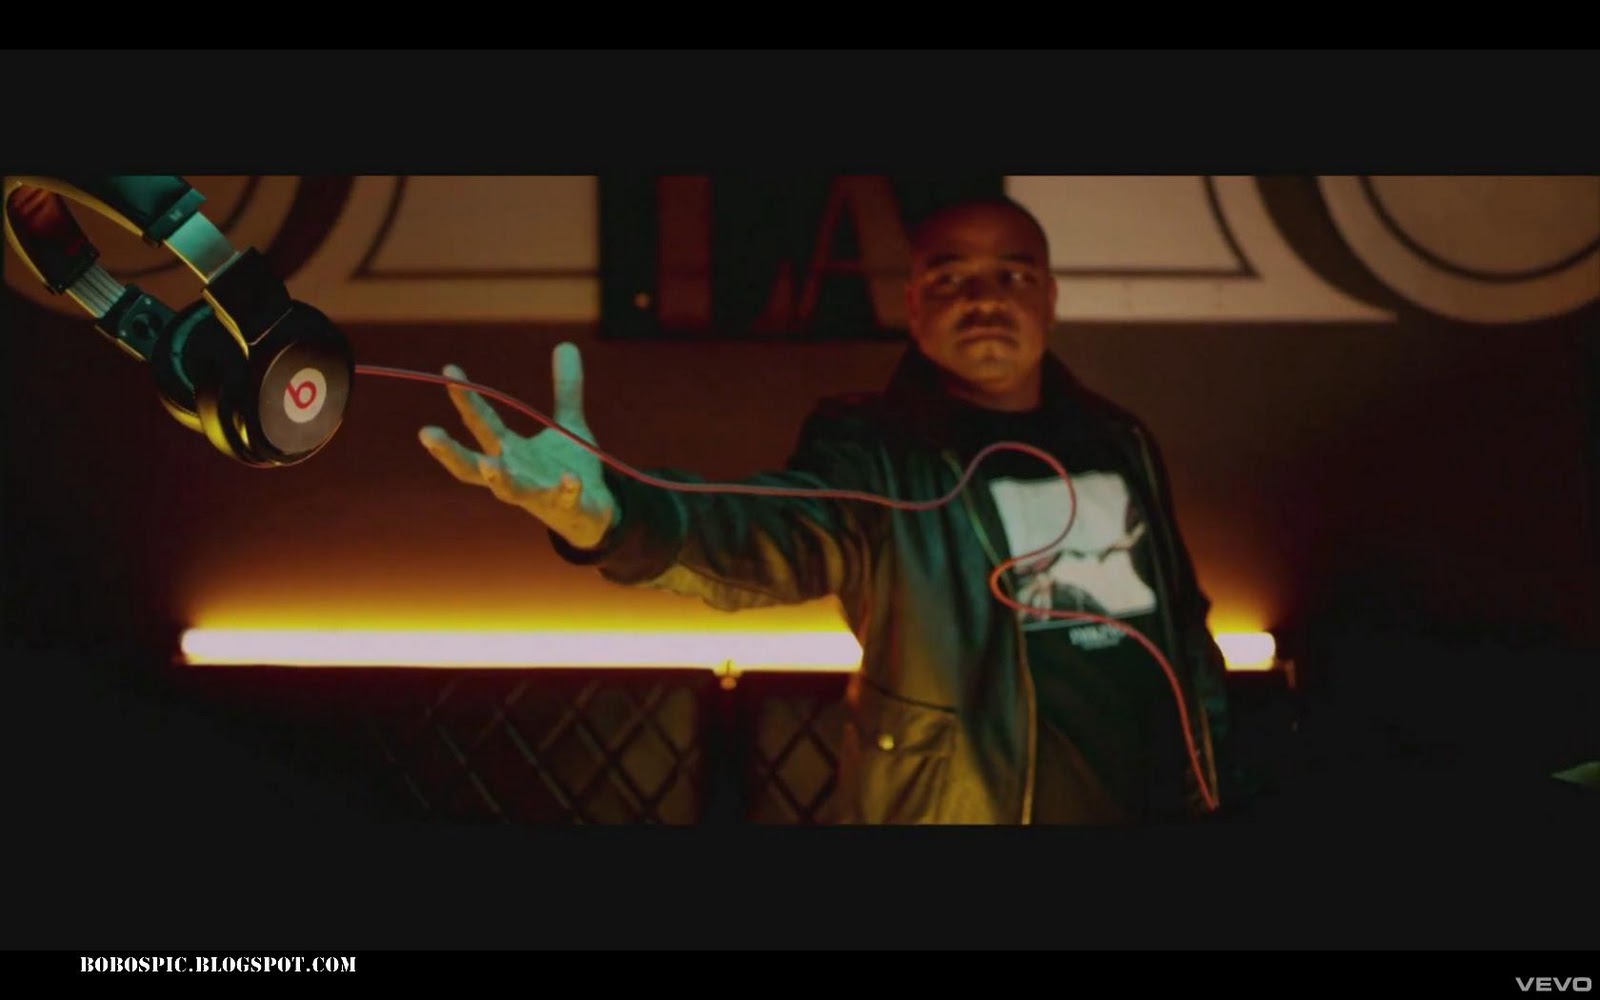 Music Video Pics: Dr. Dre - Kush ft. Snoop Dogg, Akon video pictures1600 x 1000